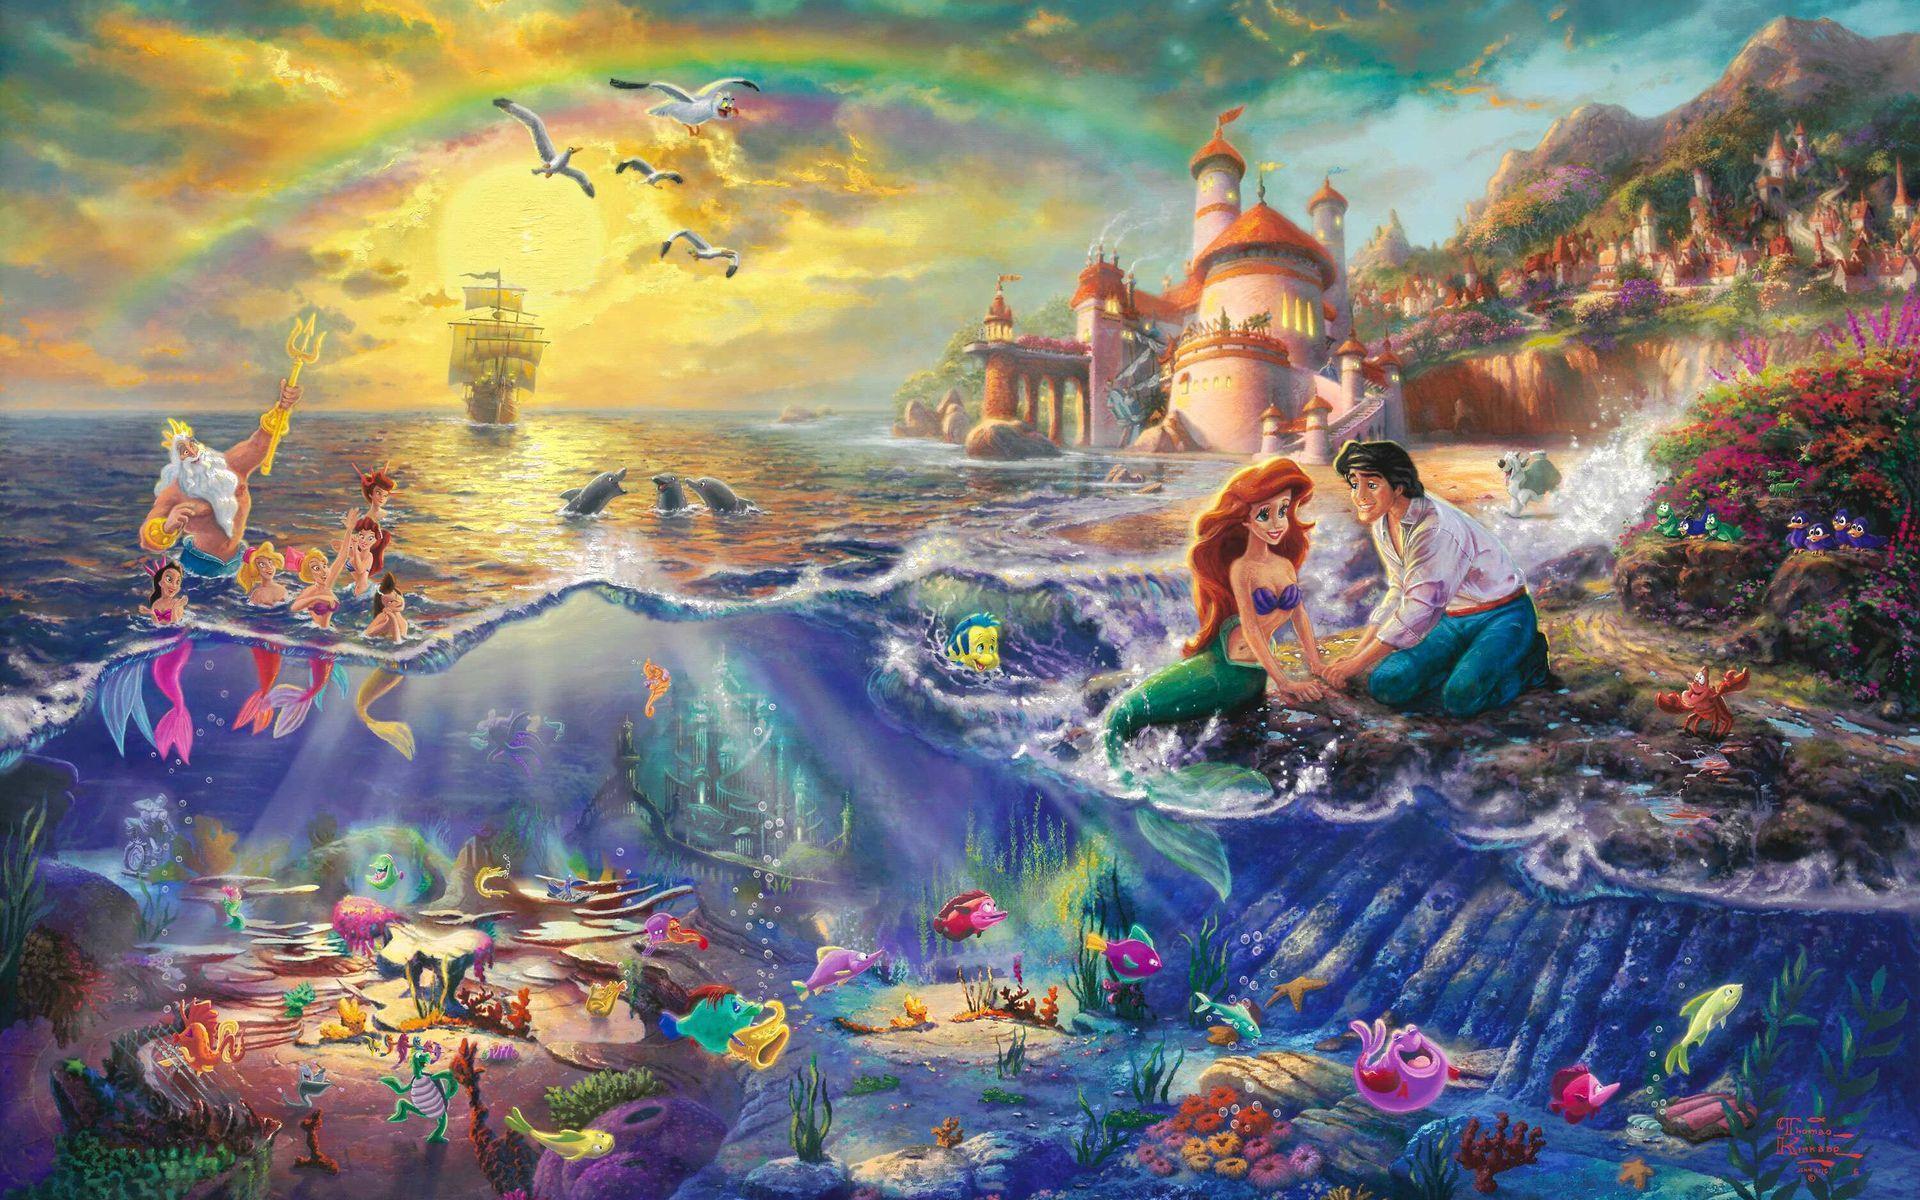 The little mermaid and prince eric in a magical underwater kingdom - Ariel, mermaid